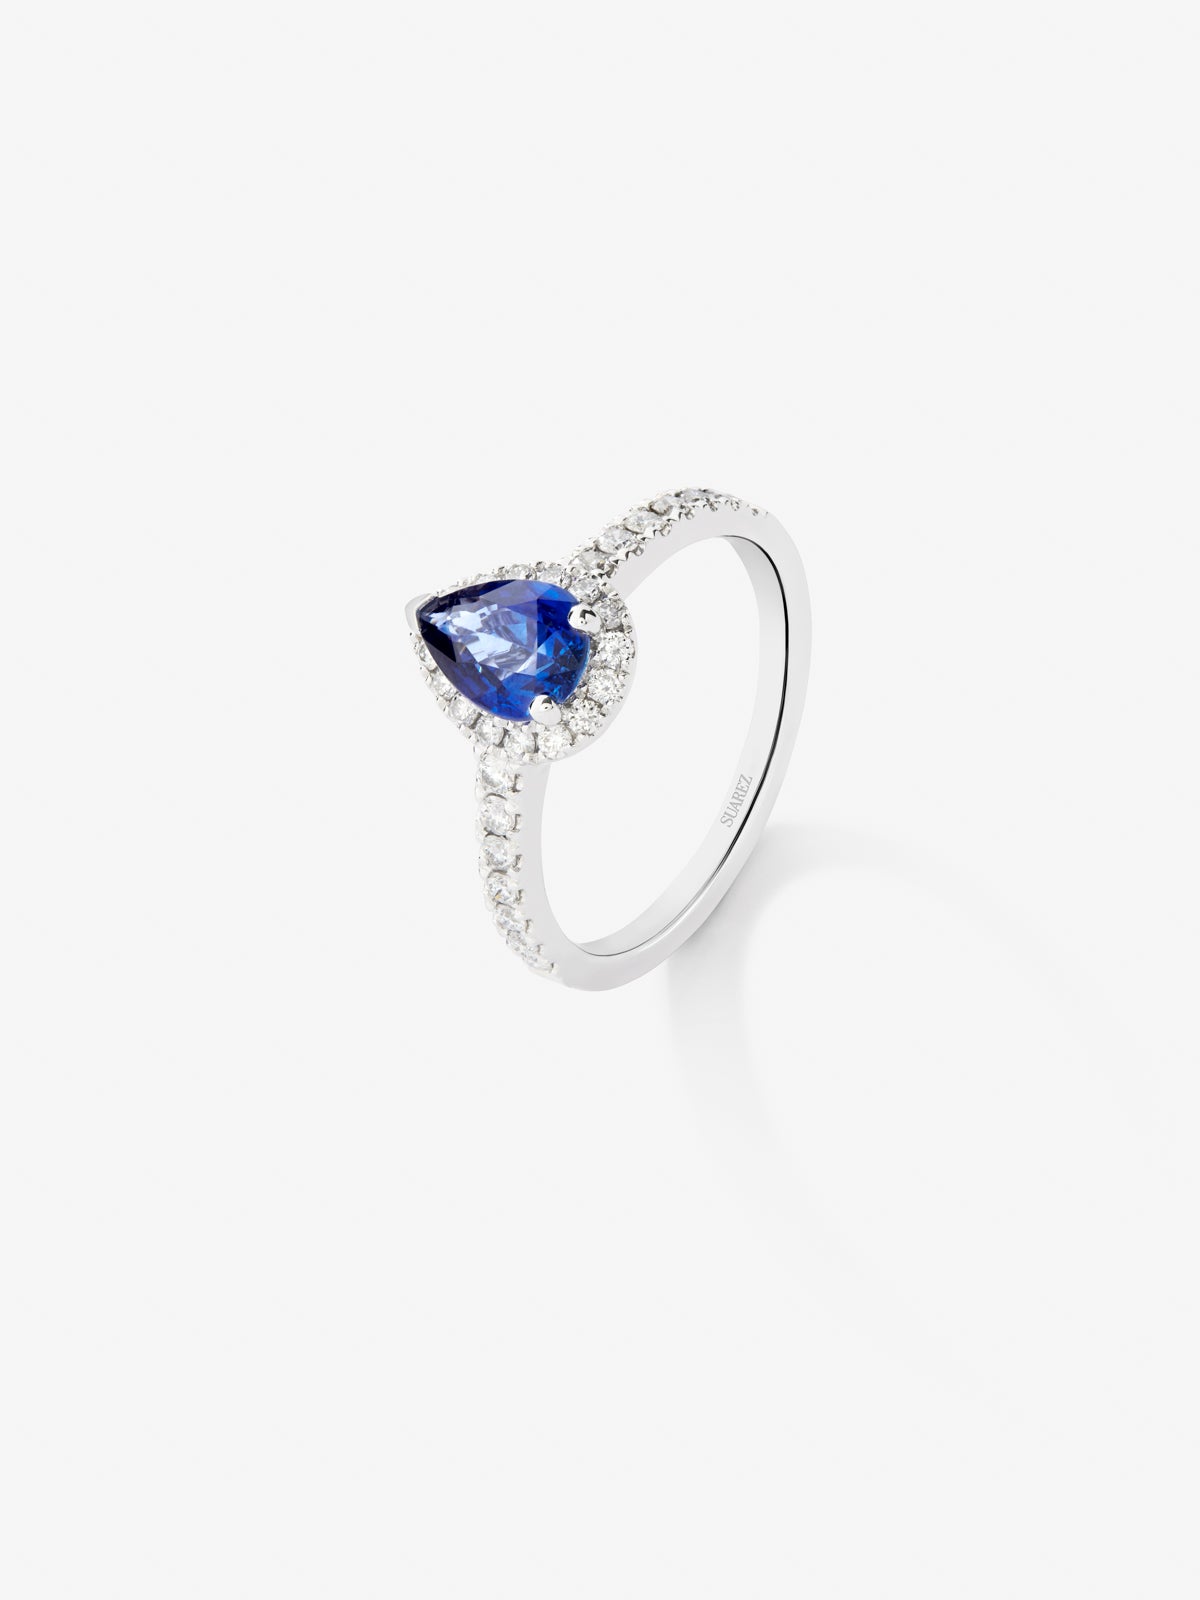 18K white gold ring with pear-cut blue sapphire of 1.83 cts and 32 brilliant-cut diamonds with a total of 0.44 cts